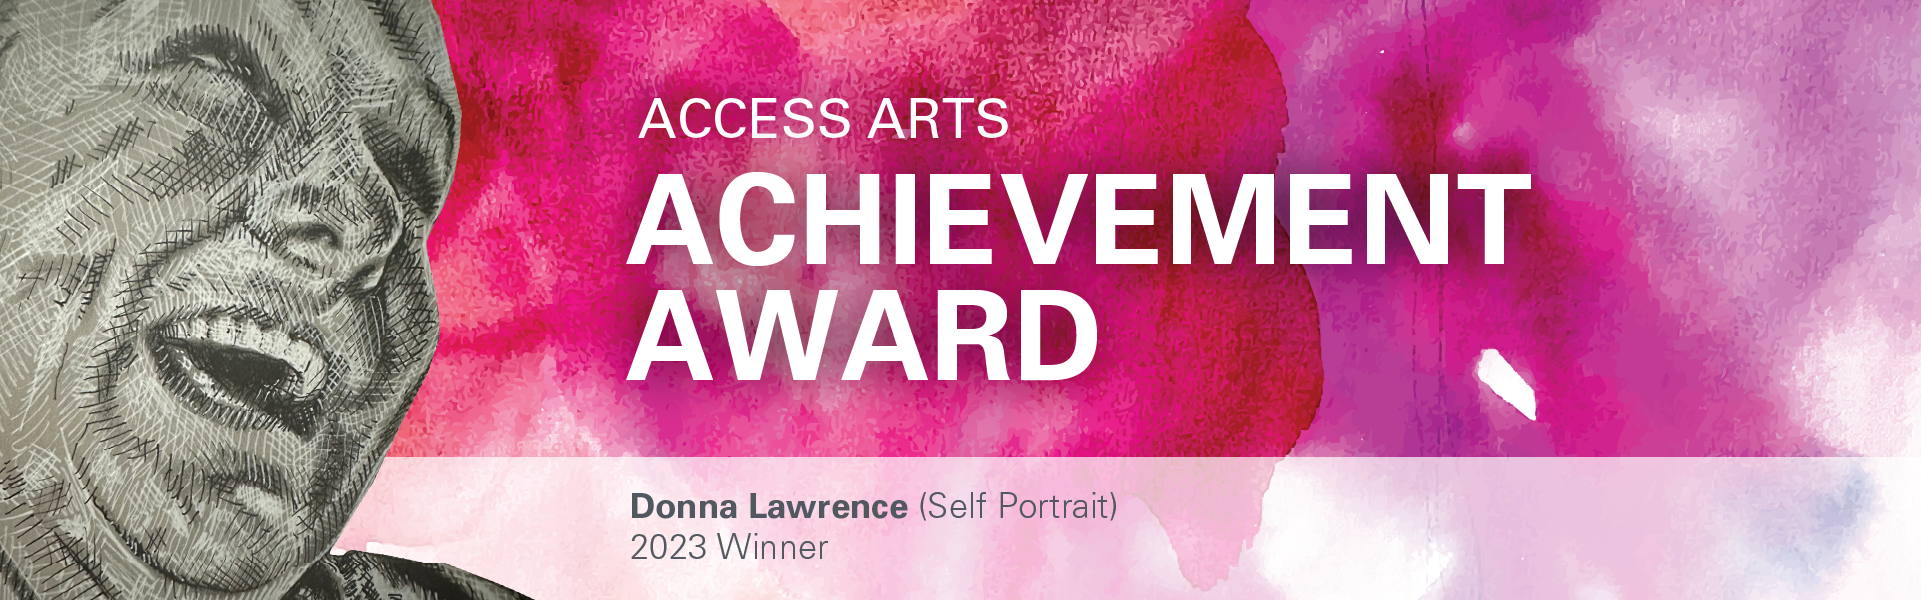 Donna Lawrence's artwork is etched on top of a pink watercolour background. The artwork is a self portrait of Donna who is smiling and looking off to the side. The words "Access Arts Achievement Award" and "Donna Lawrence (self portrait), 2023 Winner" are placed on top in white.